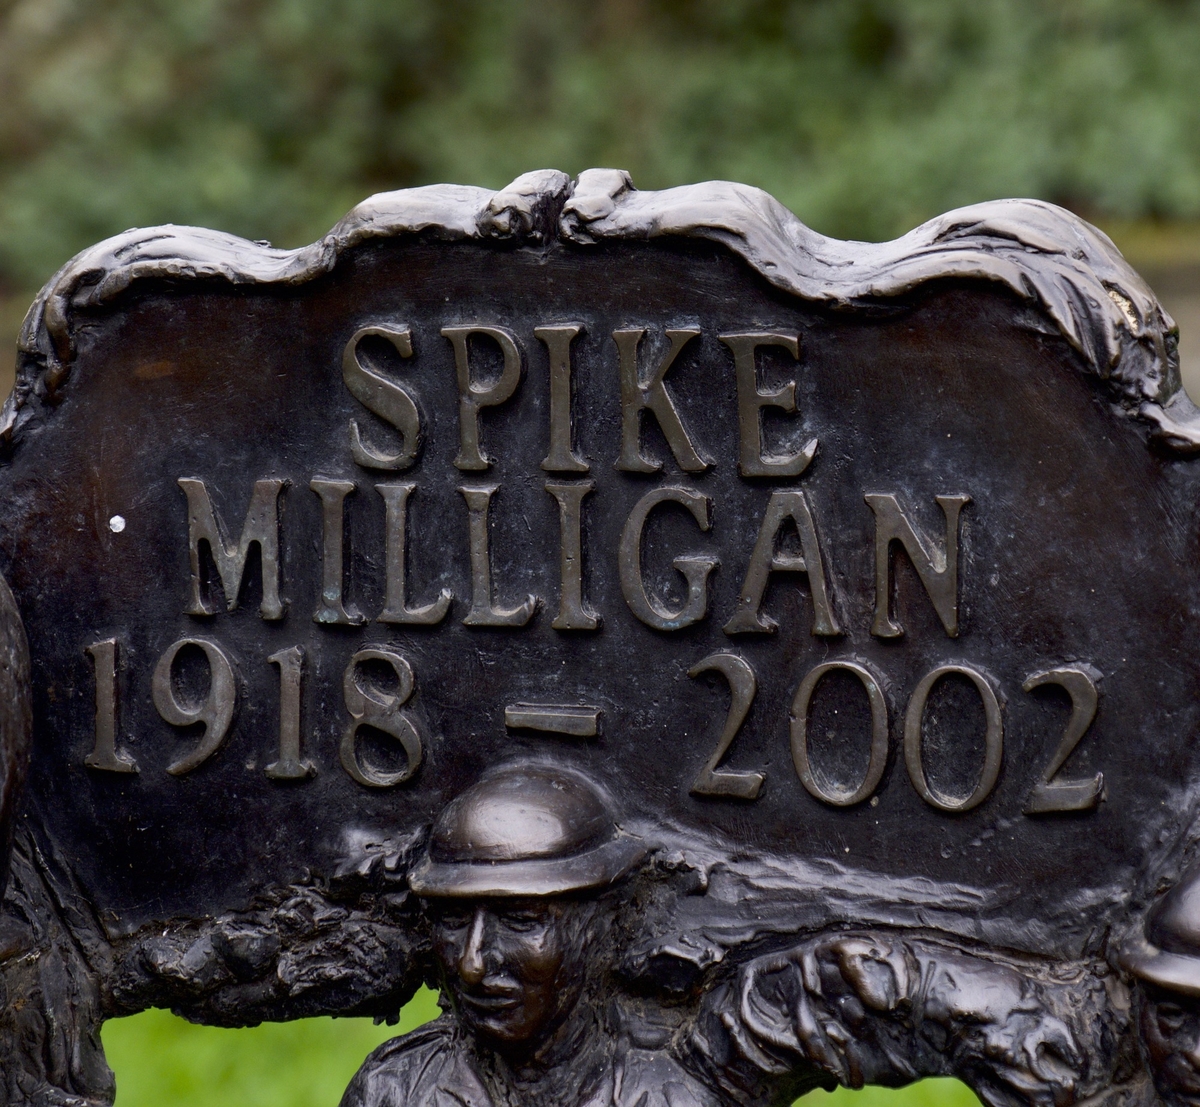 A Conversation with Spike (Milligan)